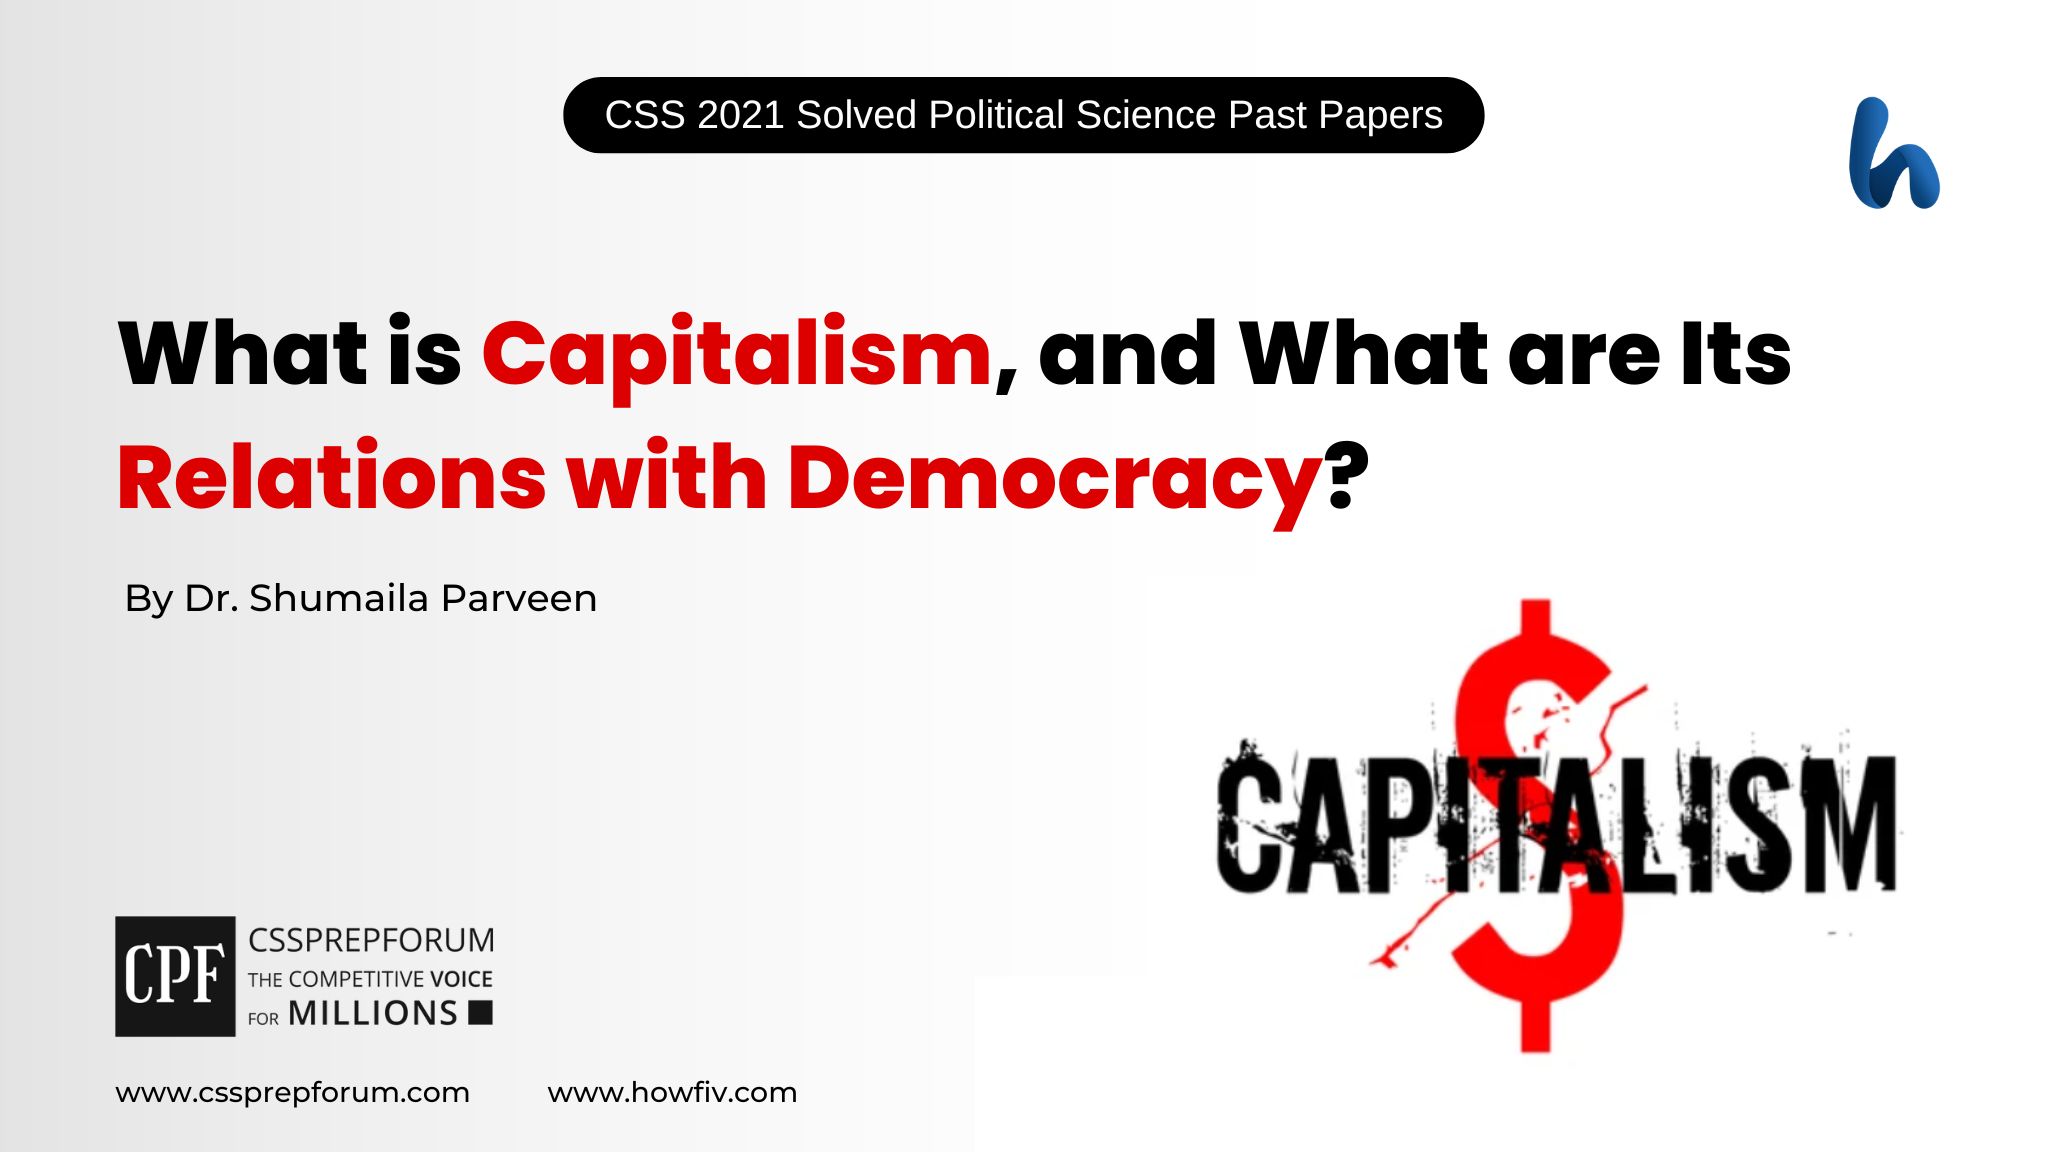 _What is Capitalism, and What are Its Relations with Democracy